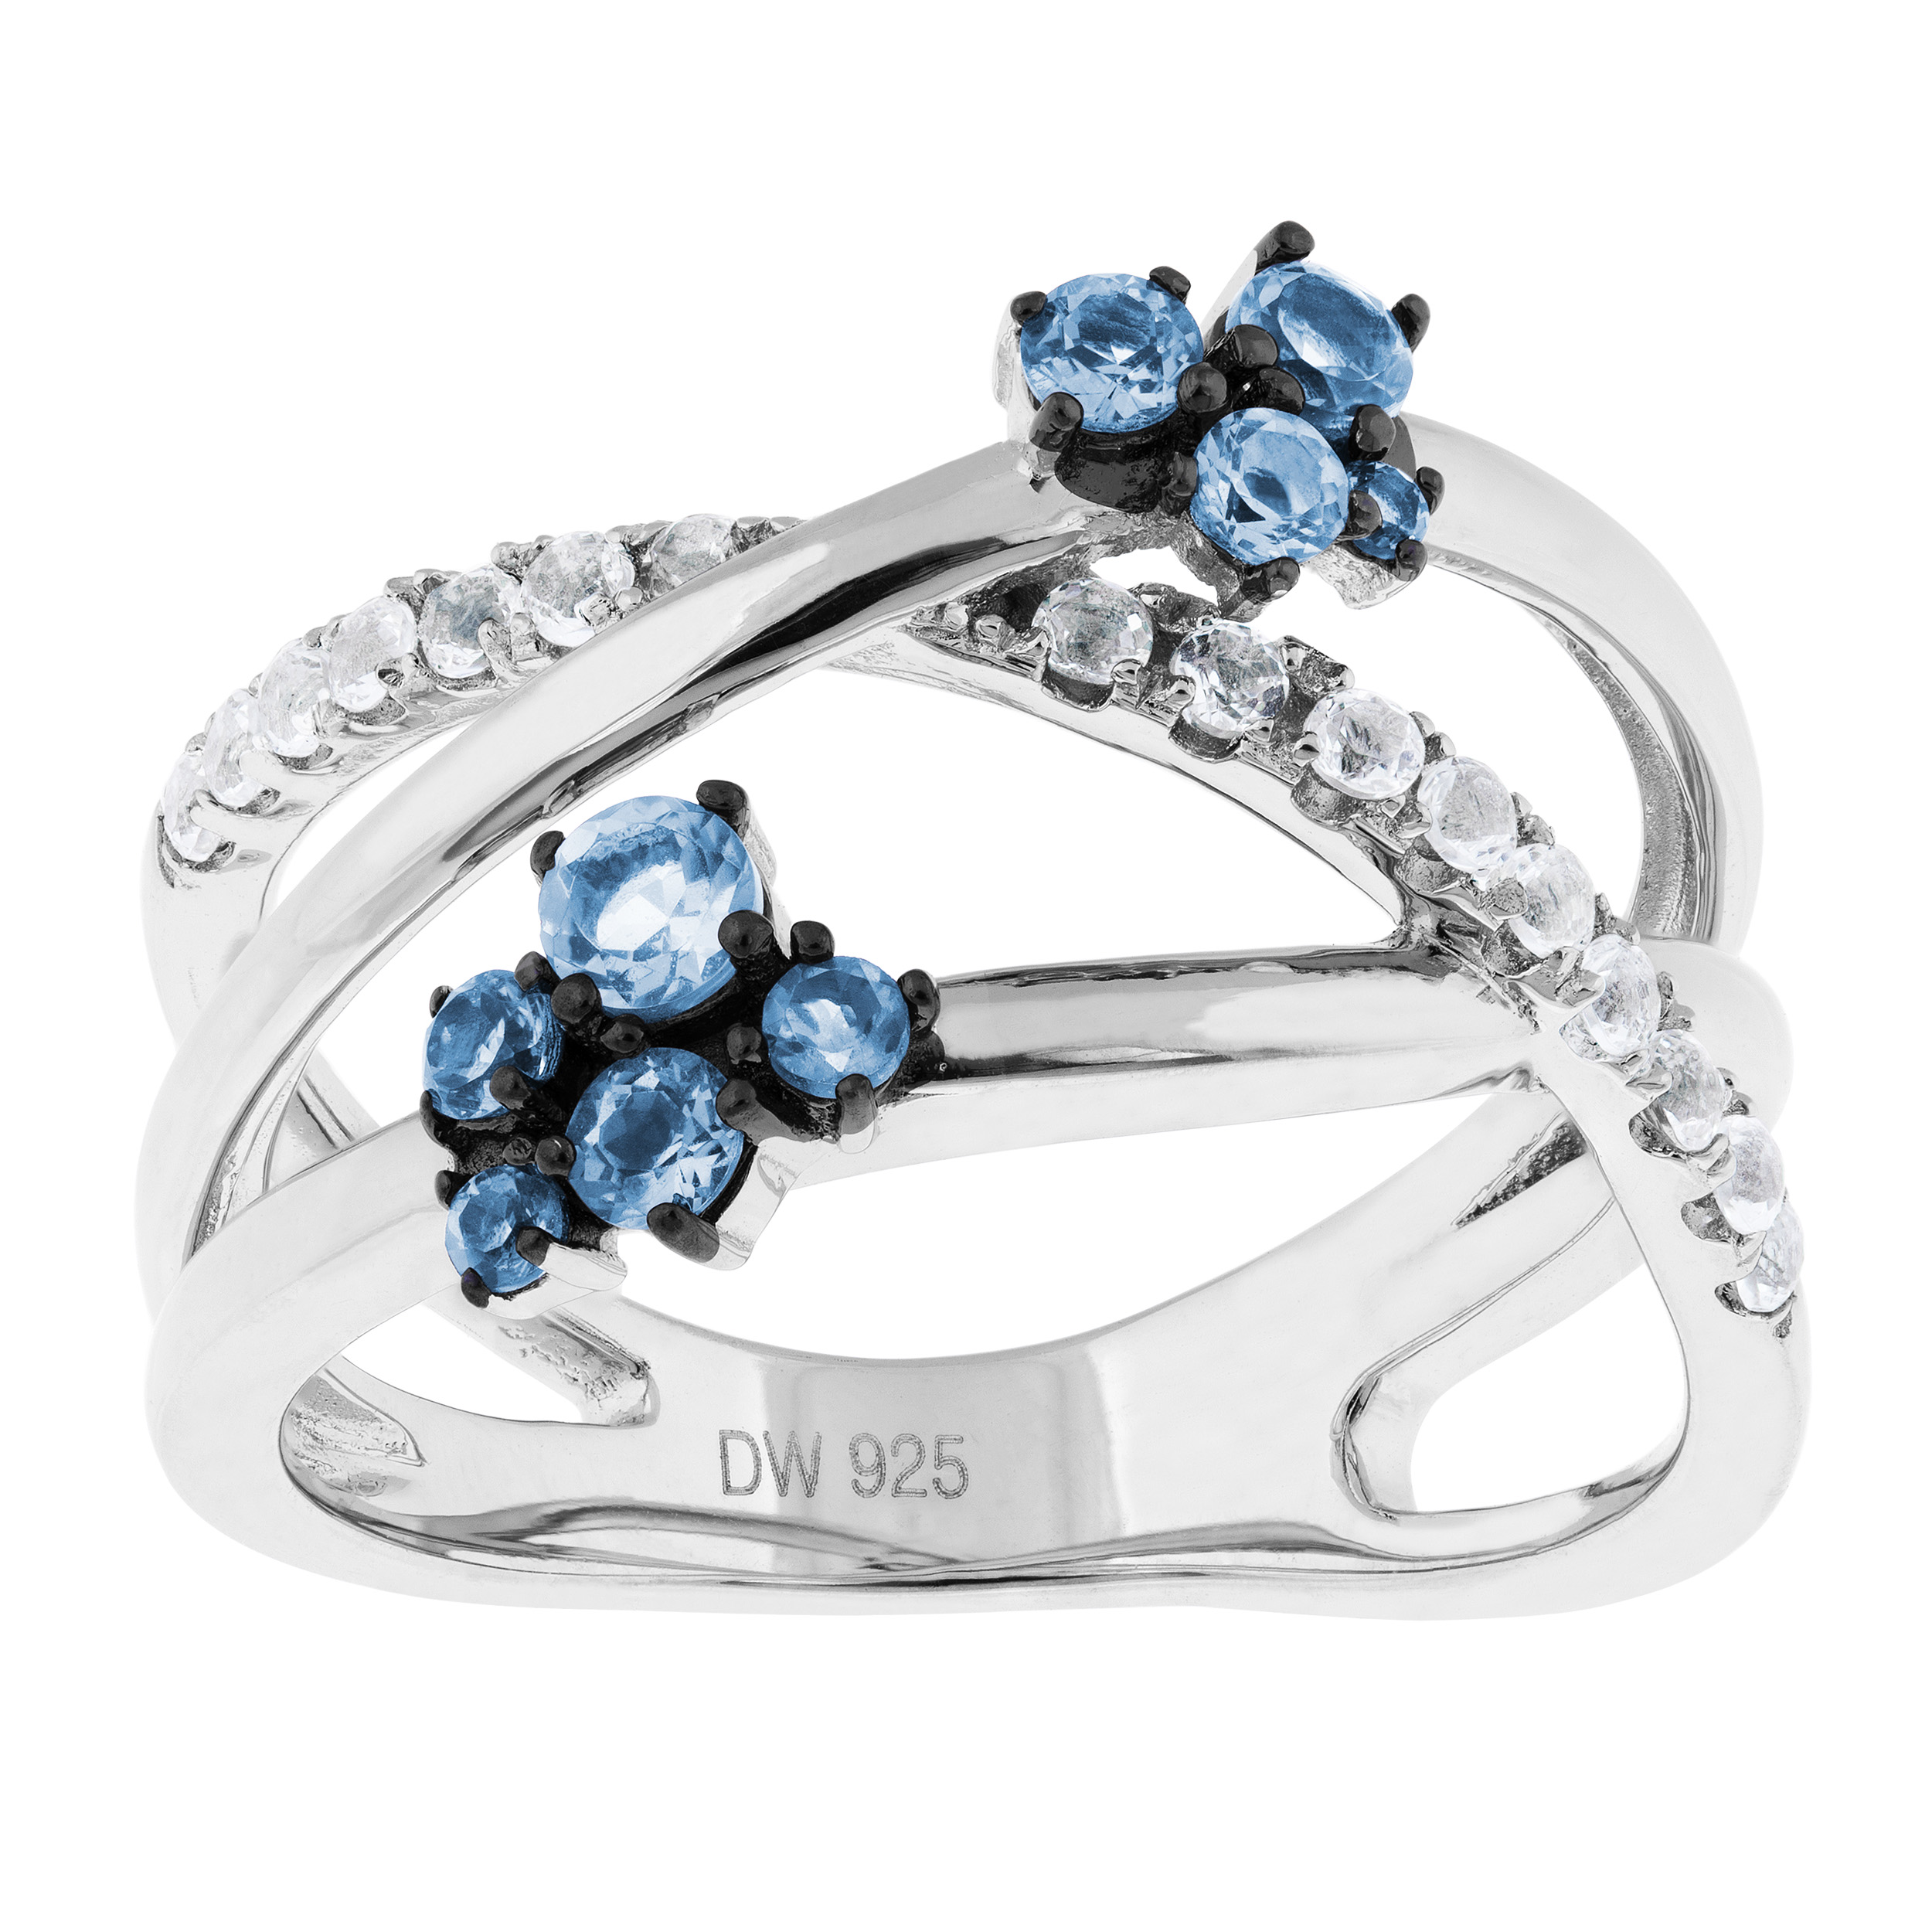 Swiss Blue Topaz and White Topaz Ring, Rhodium Plated Sterling Silver